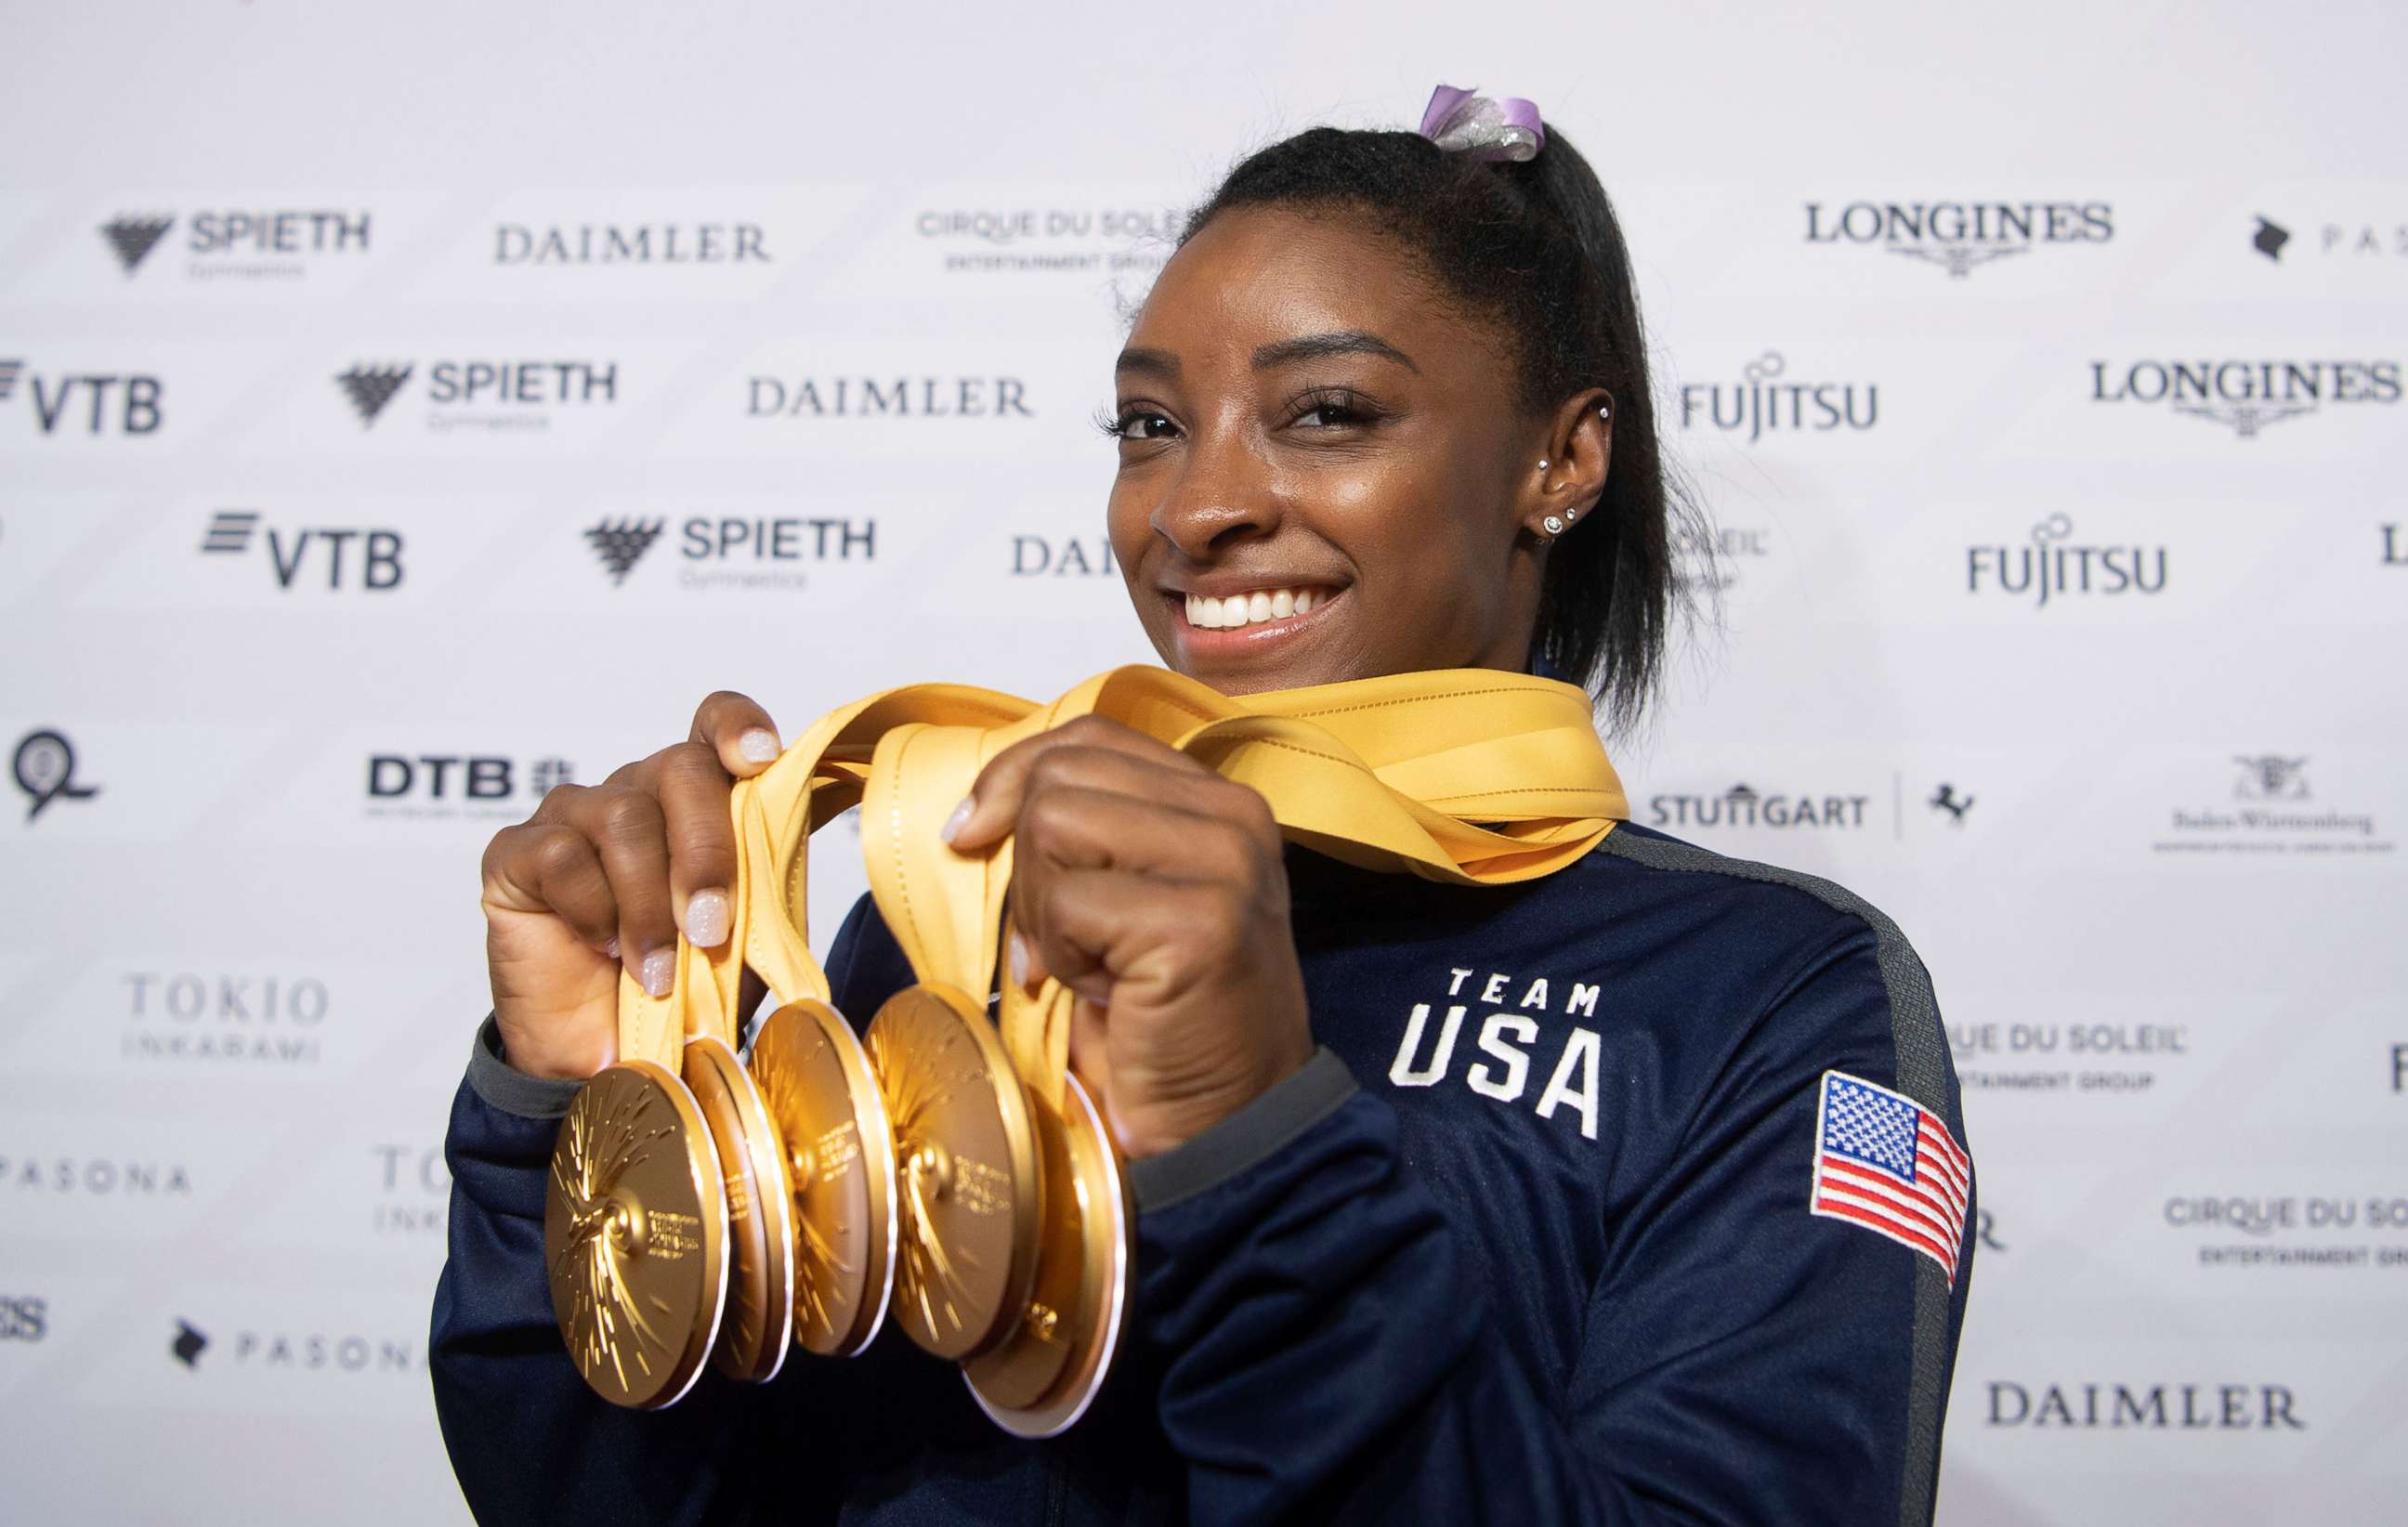 PHOTO: Simone Biles of the United States shows her five gold medals at the Gymnastics World Championships in Stuttgart, Germany, Oct. 13, 2019.